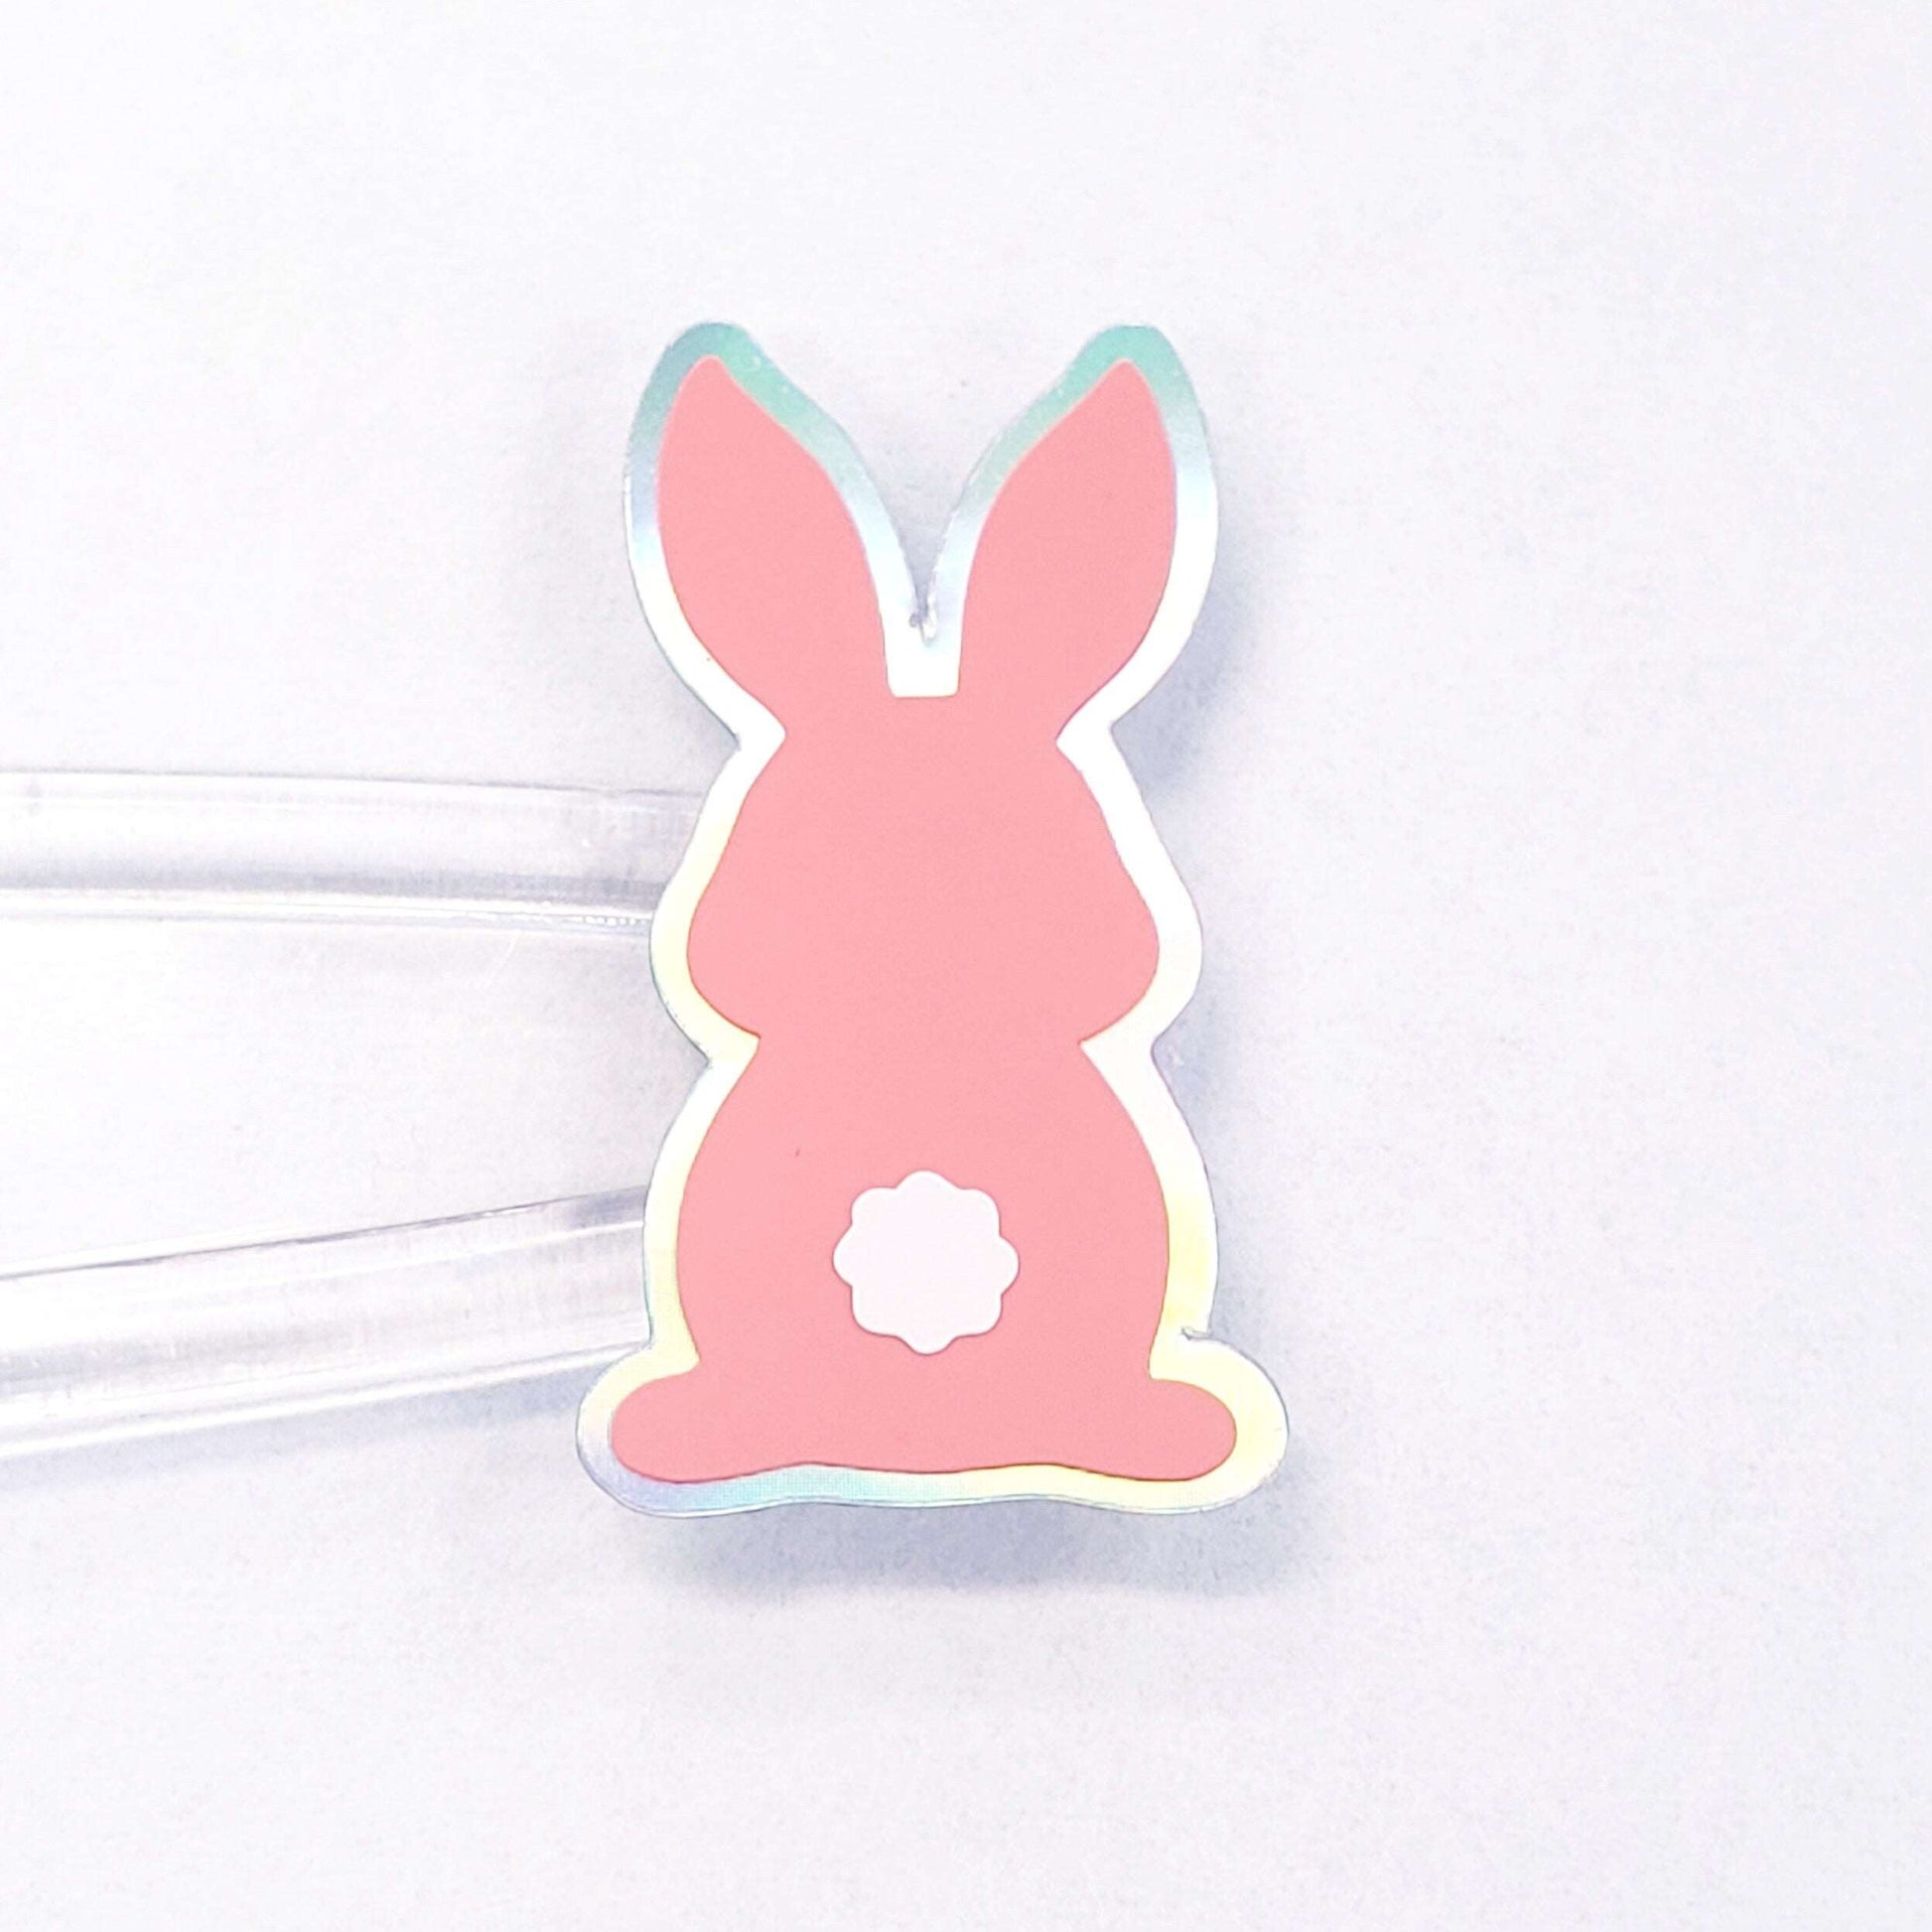 White Easter Bunny Stickers, set of 48 cute vinyl bunnies for Spring crafts, Easter baskets and Mother's Day cards.